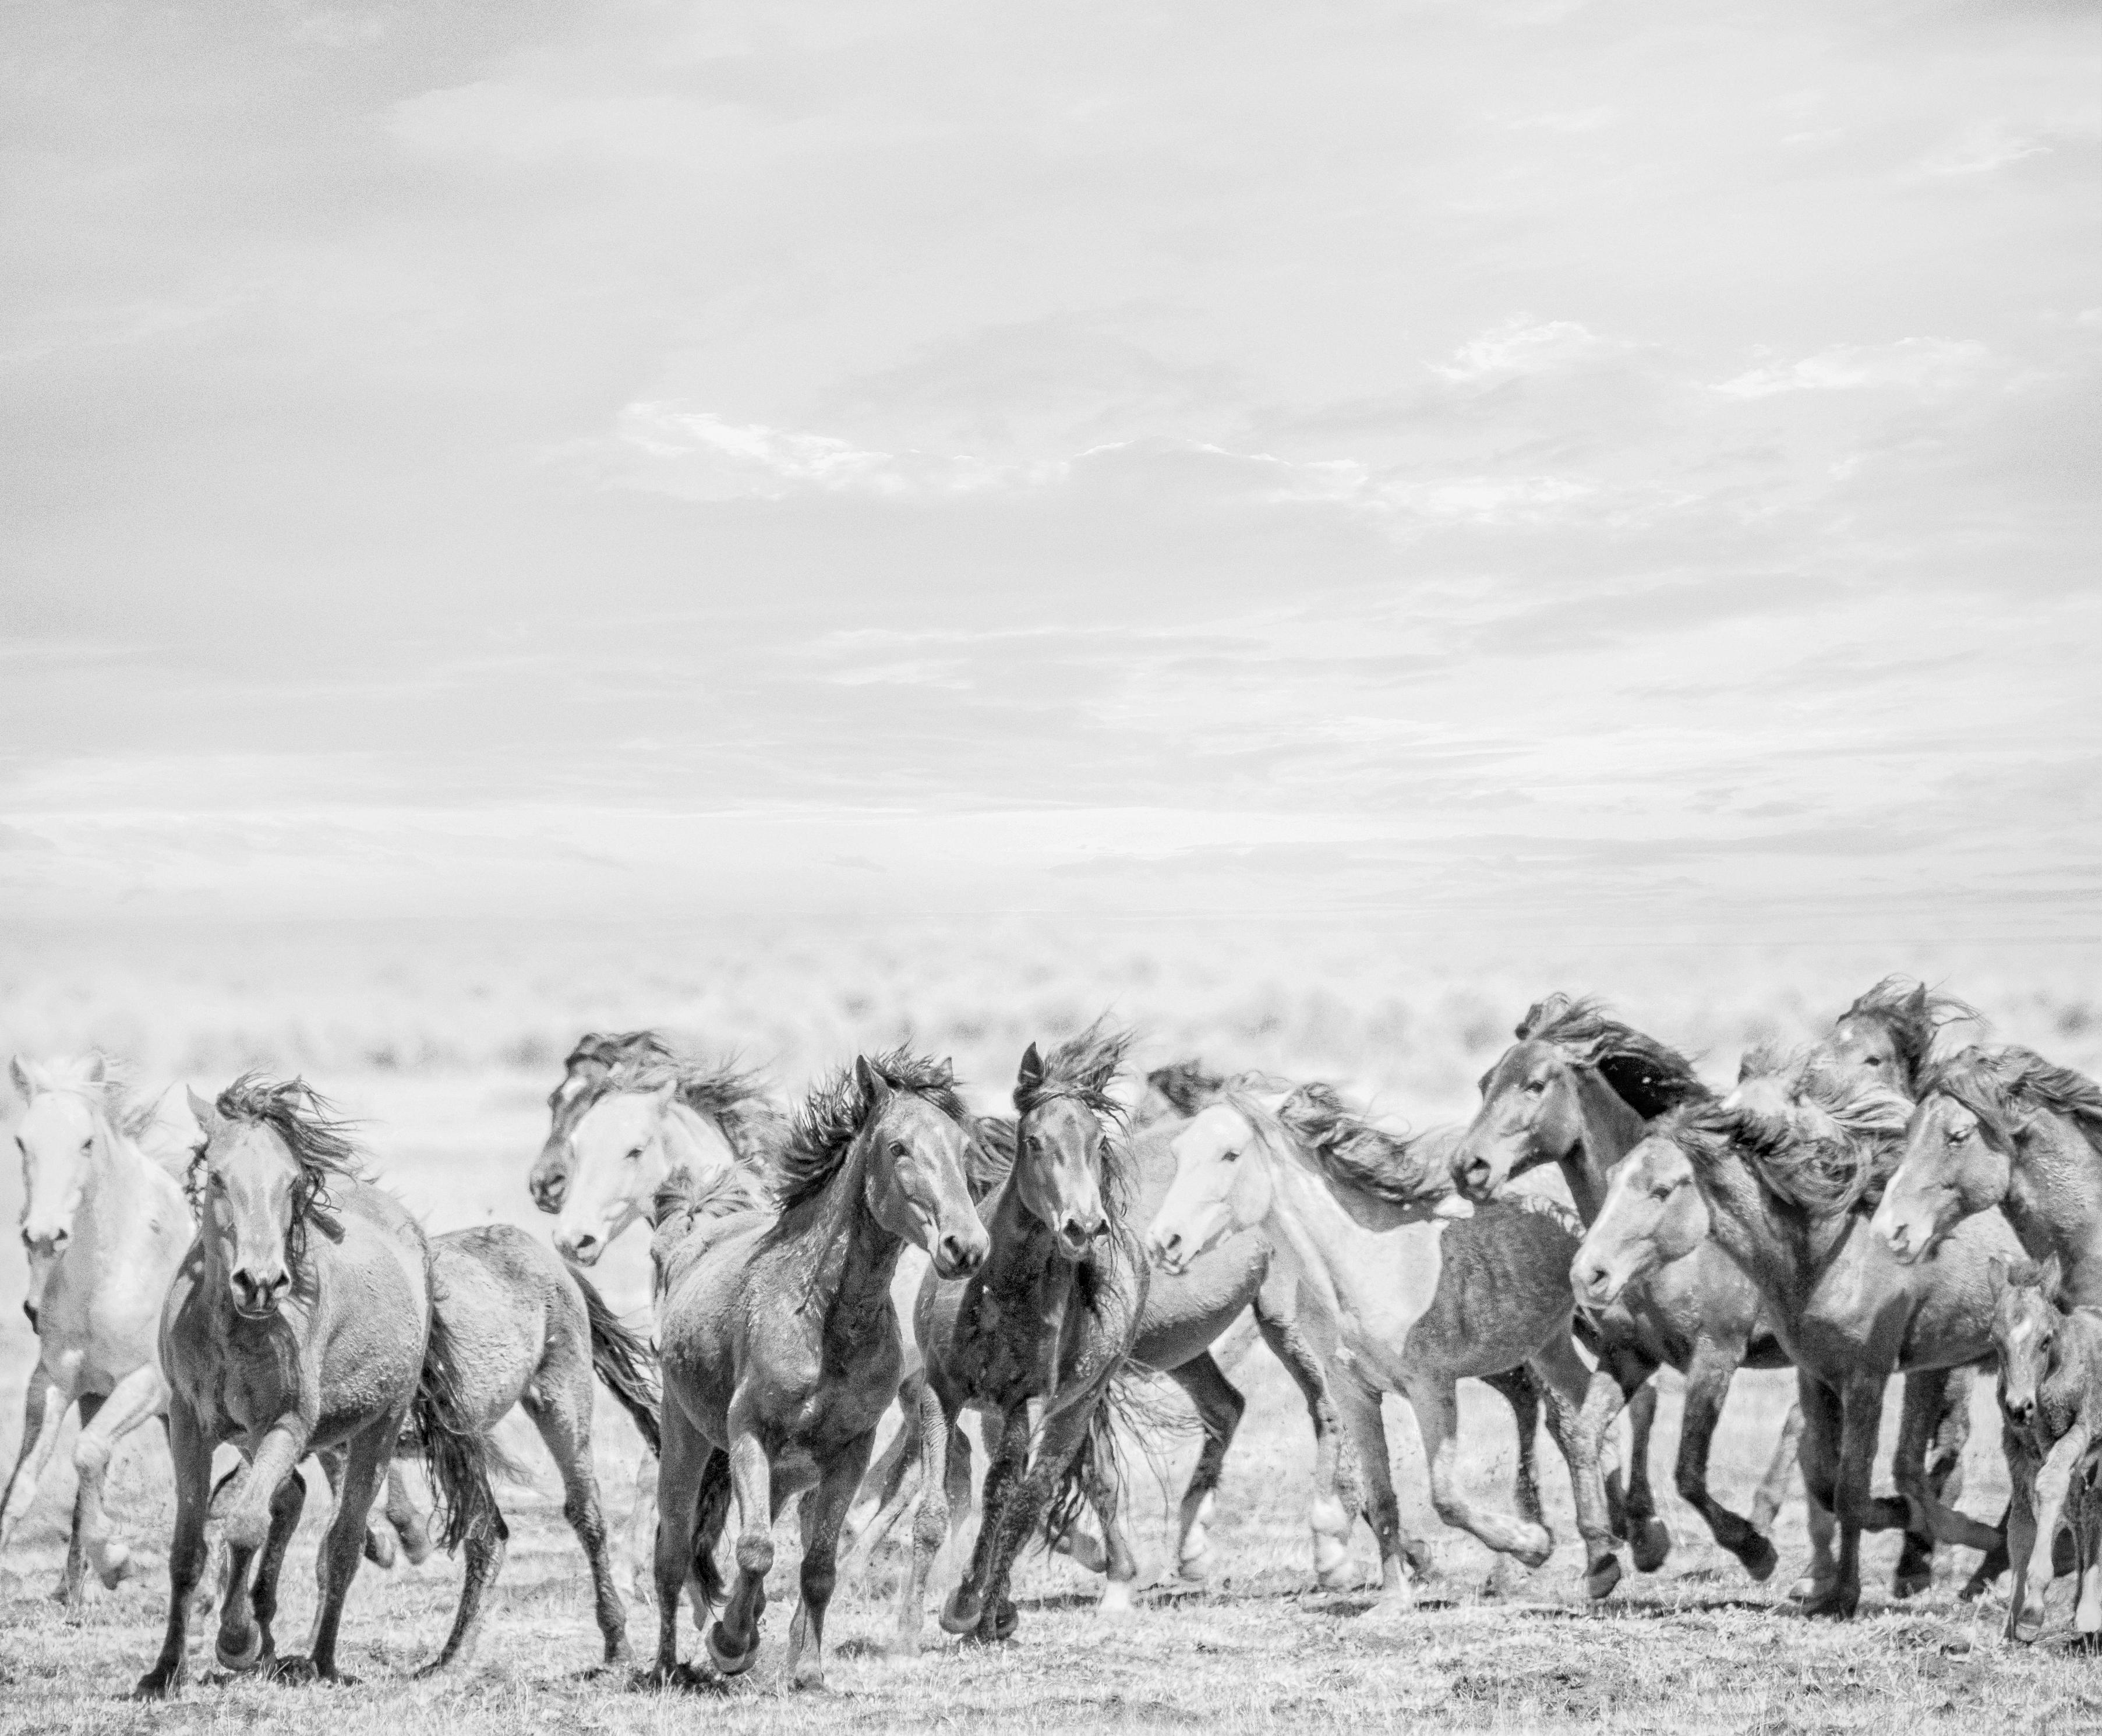 Shane Russeck Black and White Photograph - "Go West"  36x48 - B&W Photography of Wild Horses - (Special 1stdibs Price)